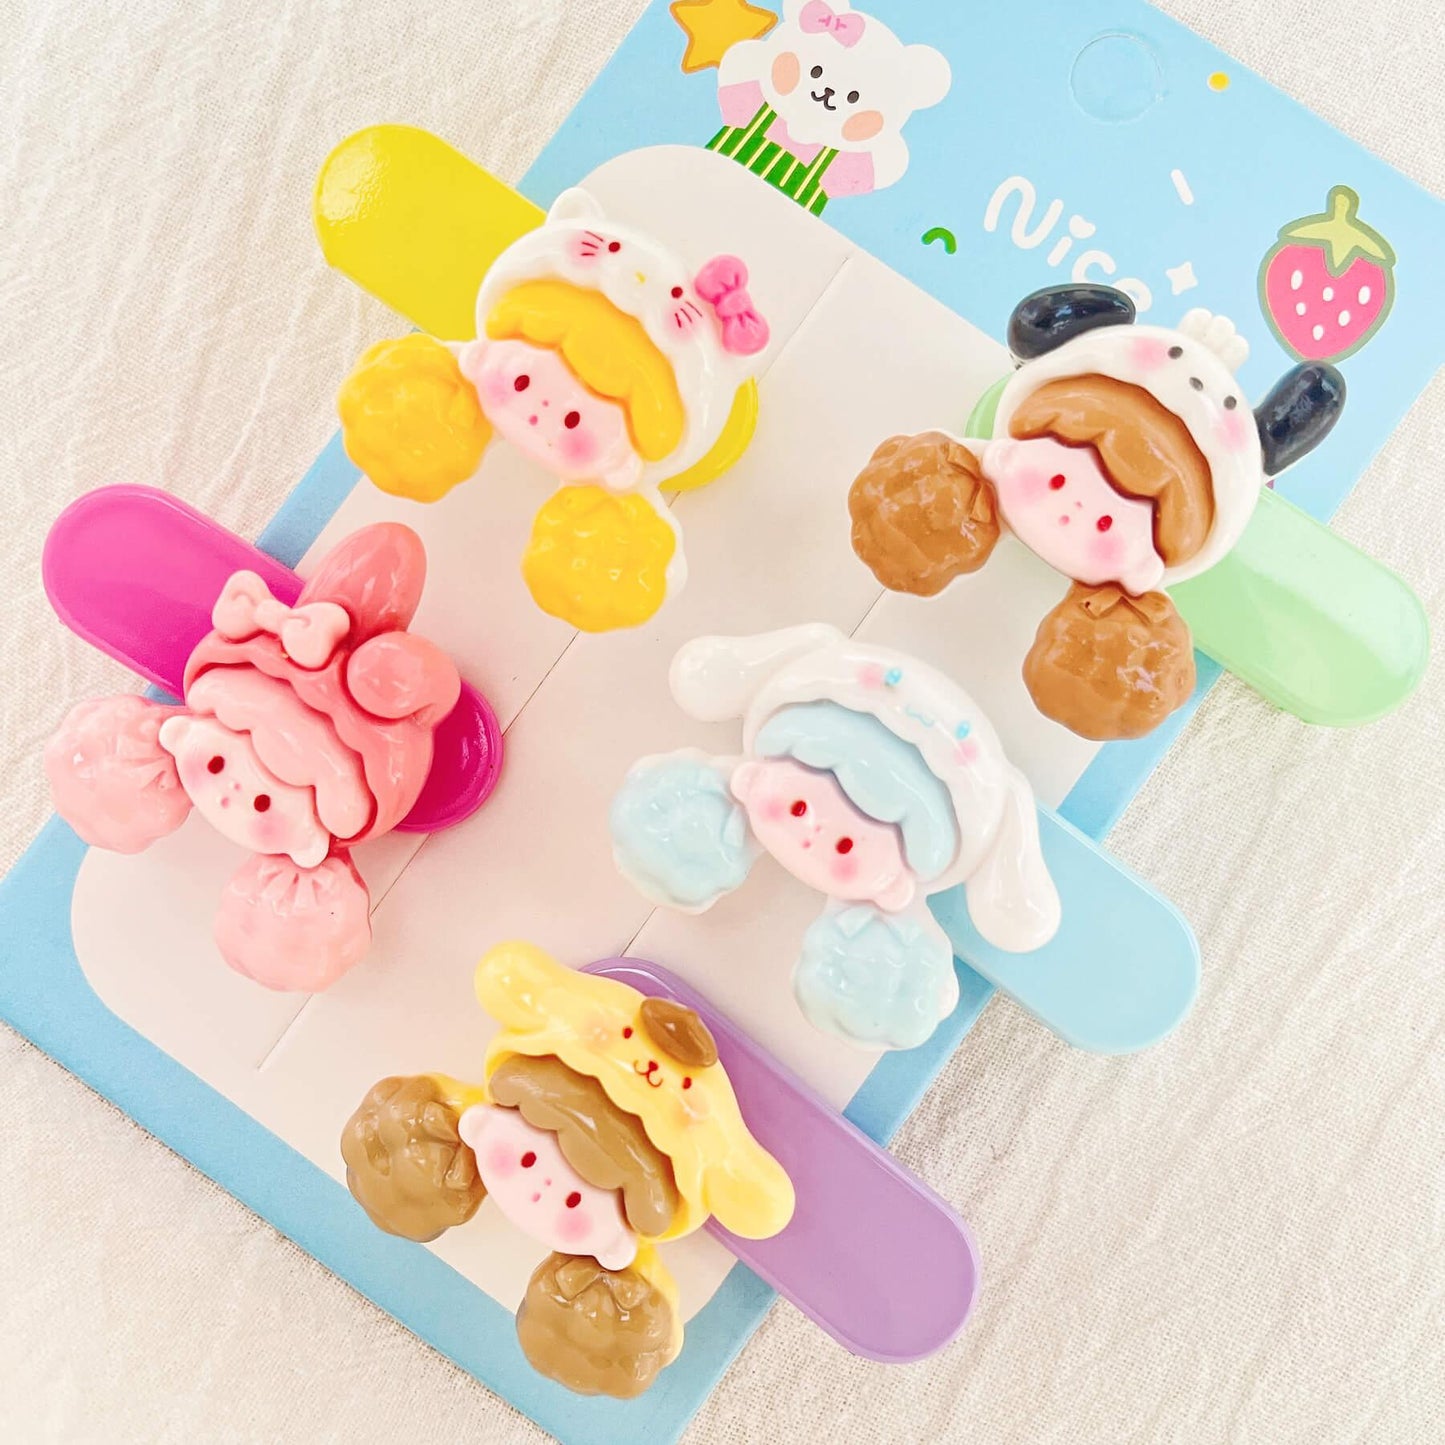 [ROTATING] 1 PCS Cute Little Girl with Double Ponytails SPINNING Hair Clip - Belle Rose Nails